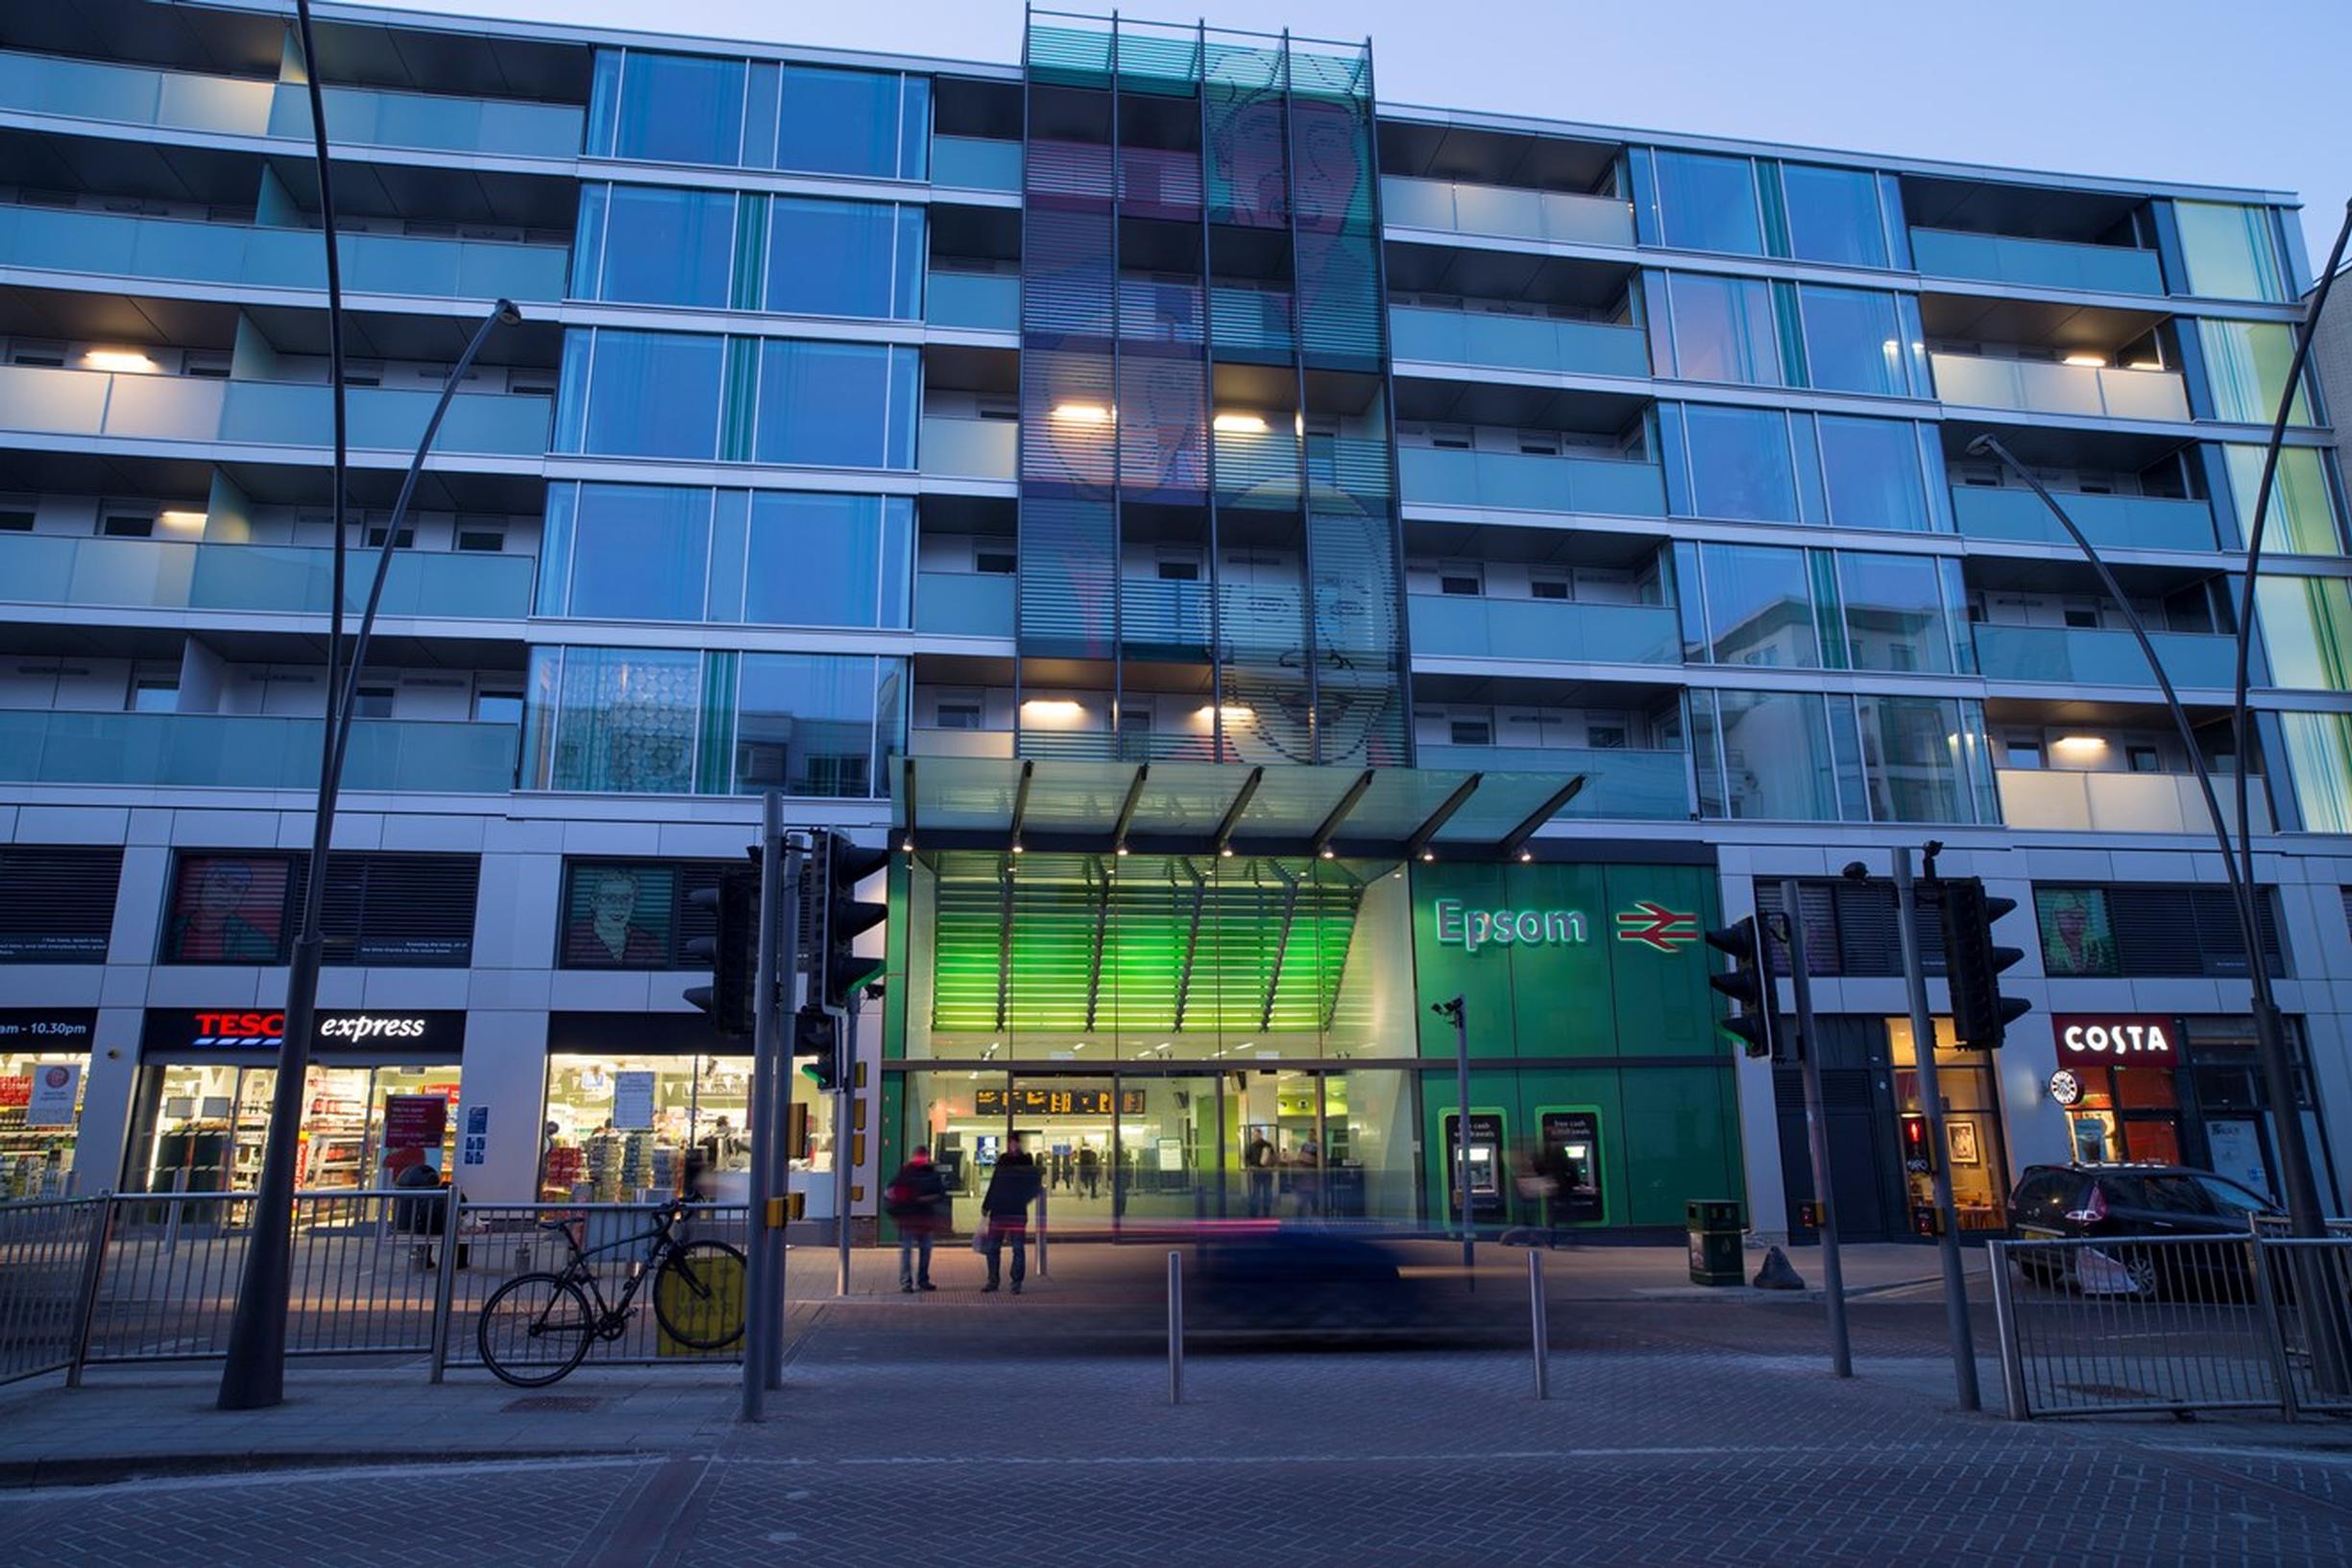 Epsom station – an example of Network Rail’s work to deliver housing. A joint venture, the £31 million development delivered 117 residential units, a 64-bedroom hotel and a local convenience store while providing significant improvements to the station